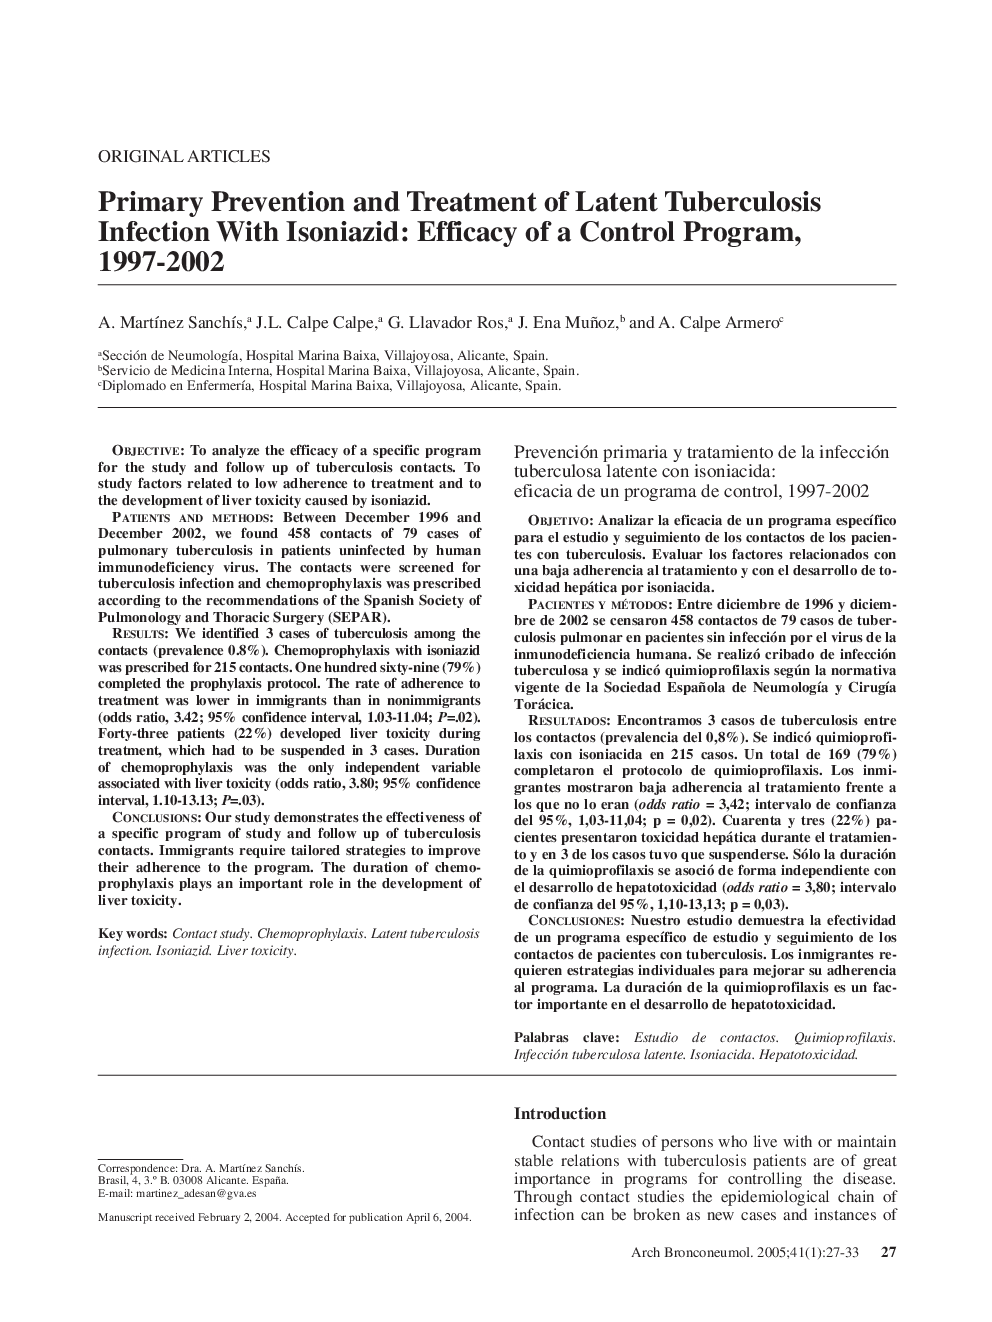 Primary Prevention and Treatment of Latent Tuberculosis Infection With Isoniazid: Efficacy of a Control Program, 1997-2002